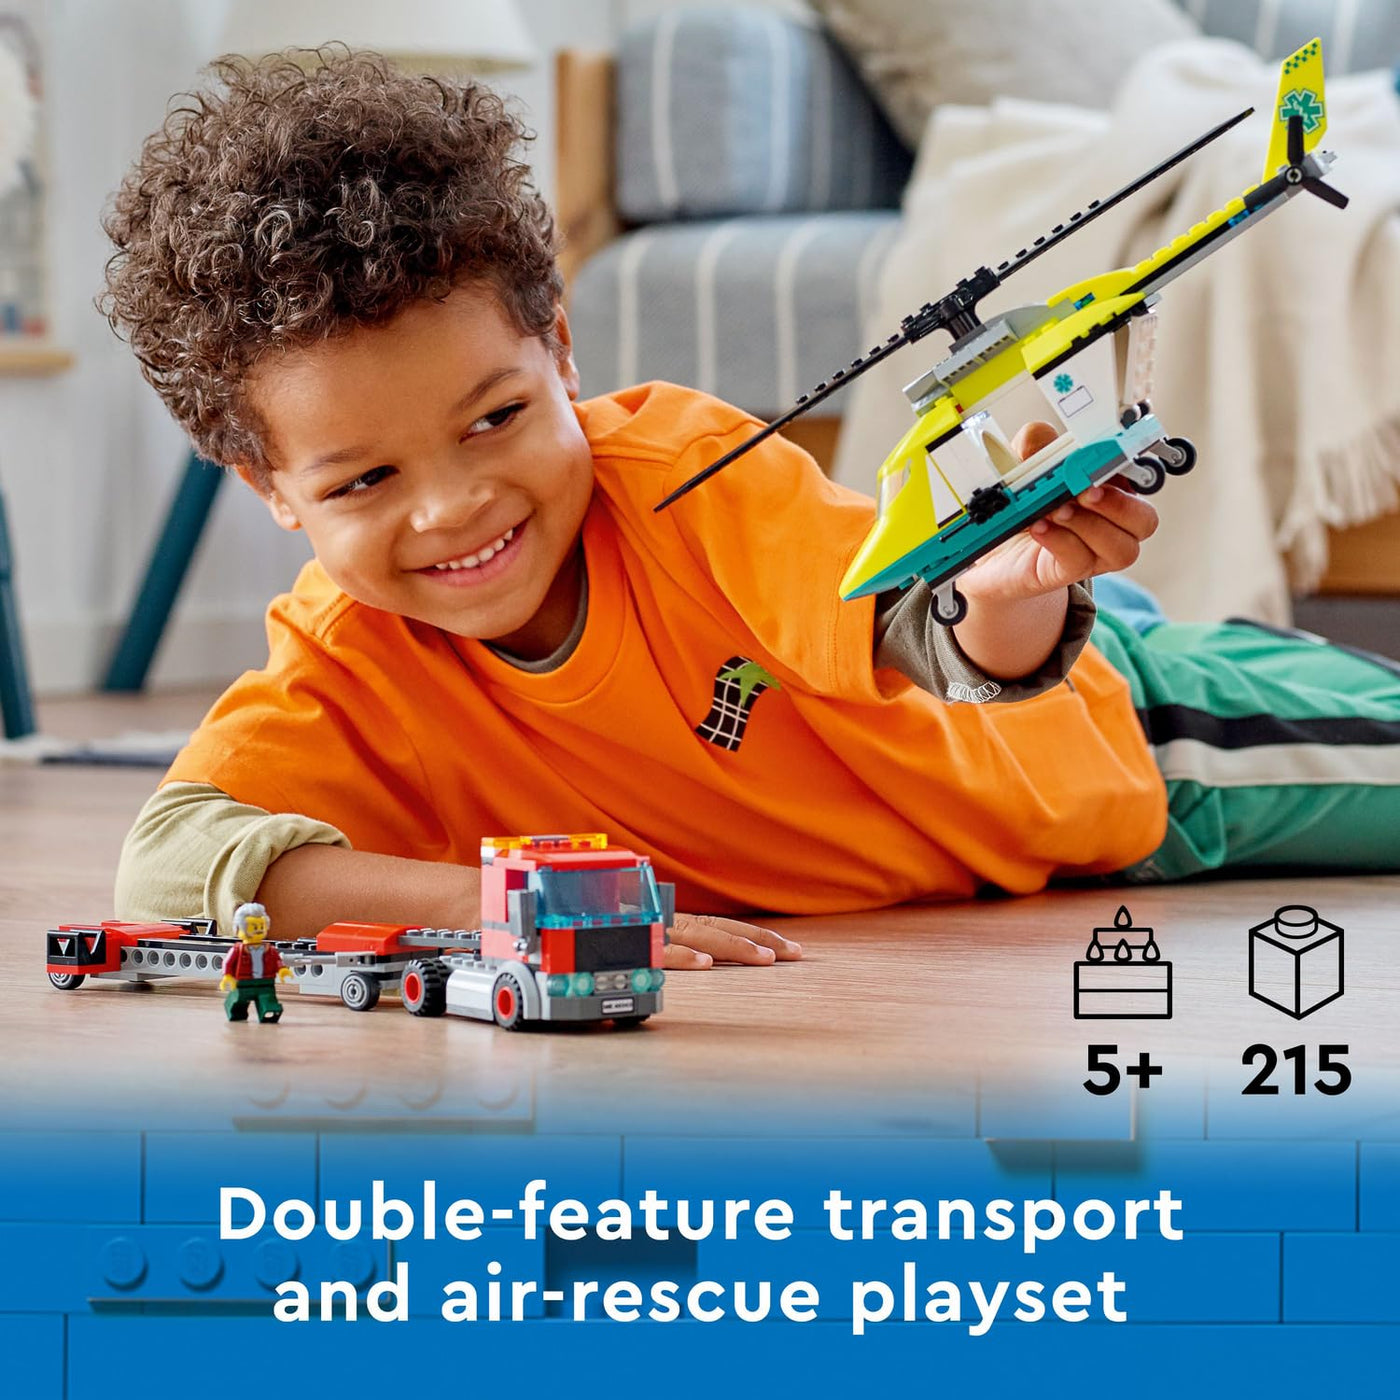 LEGO® City #60343: Rescue Helicopter Transport